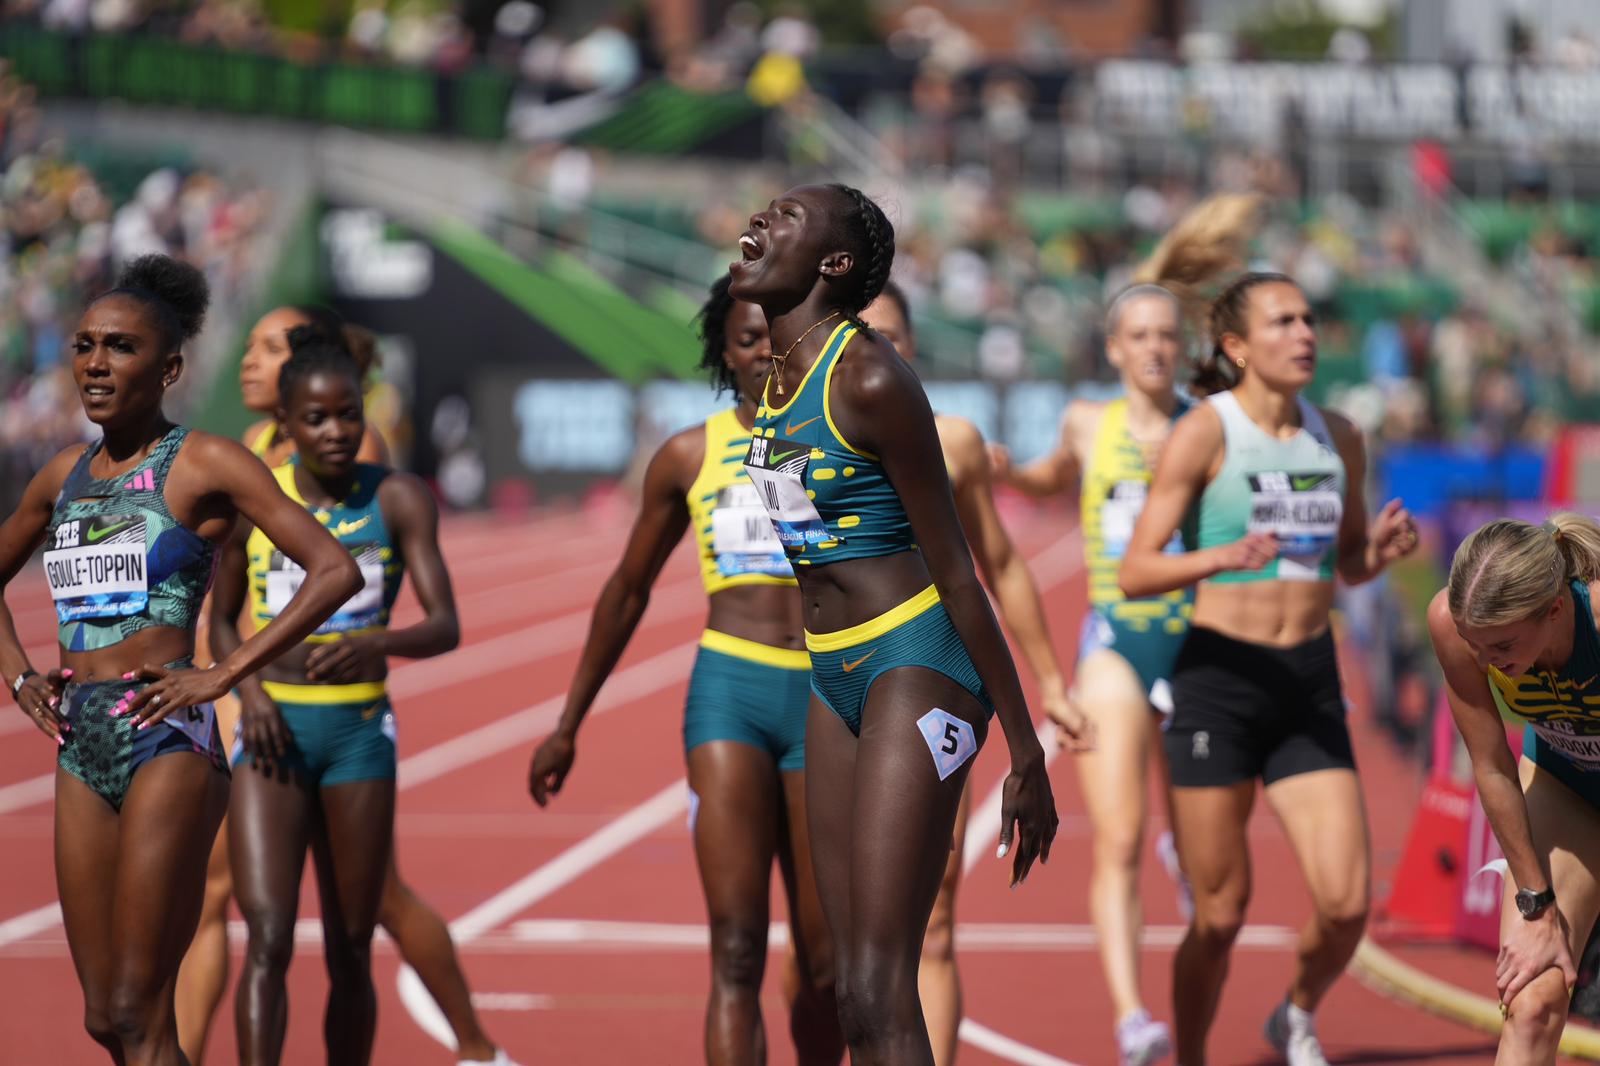 Athing Mu was among the stars on the final day of the Prefontaine Classic Eugene Diamond League final